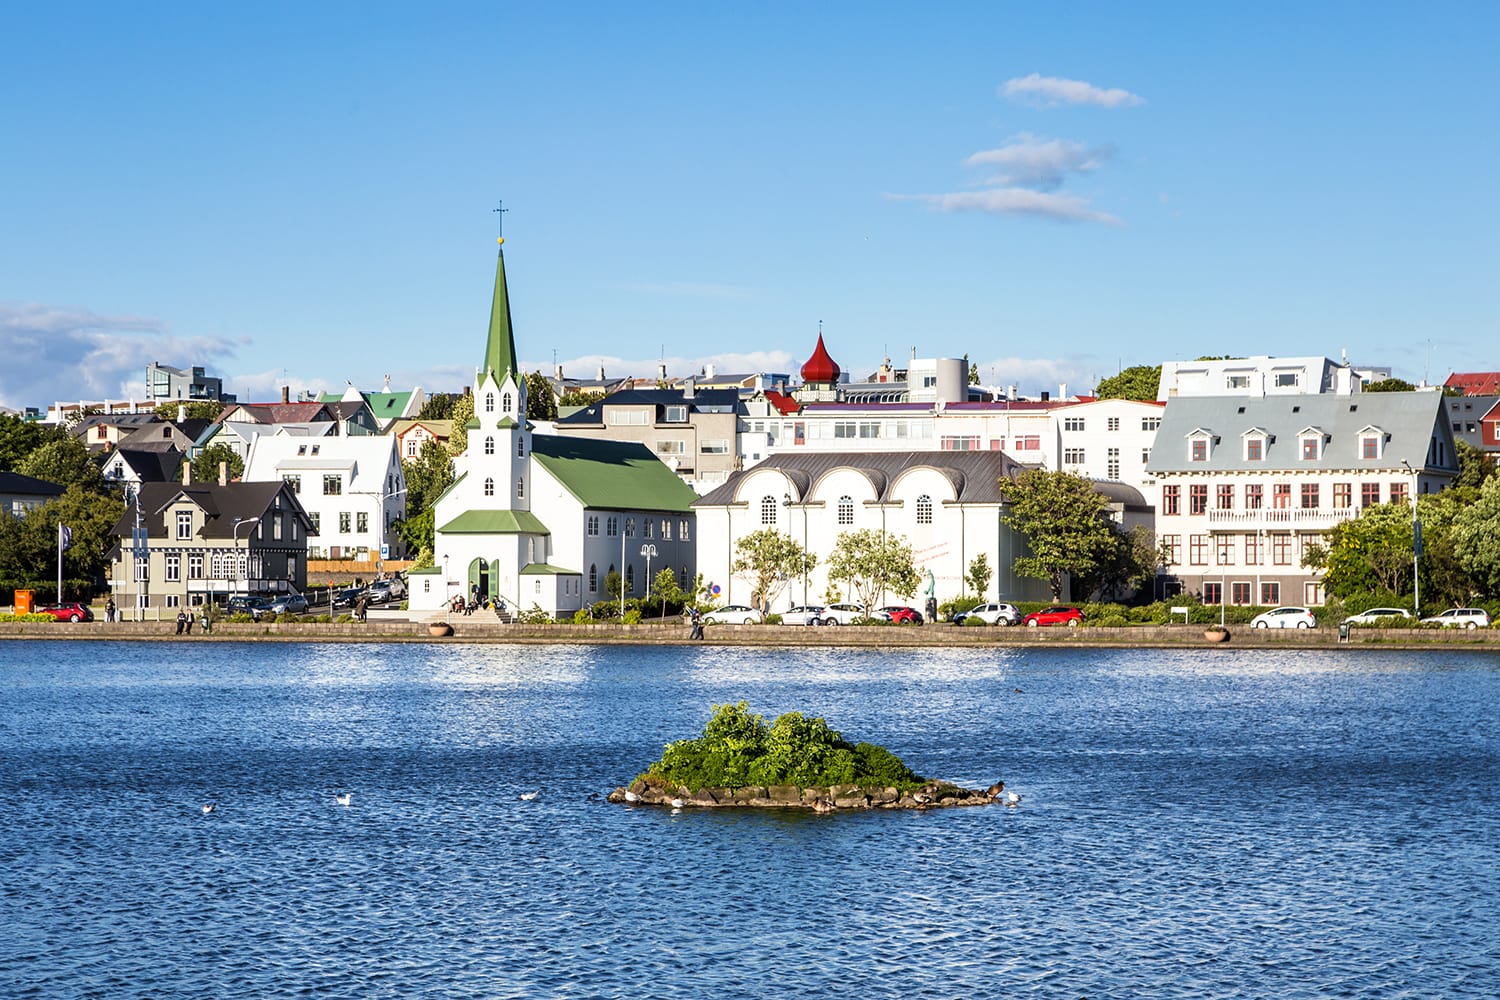 Reykjavik cityscape viewed from across the Tjornin lake in the heart of Iceland capital city on a sunny summer day.